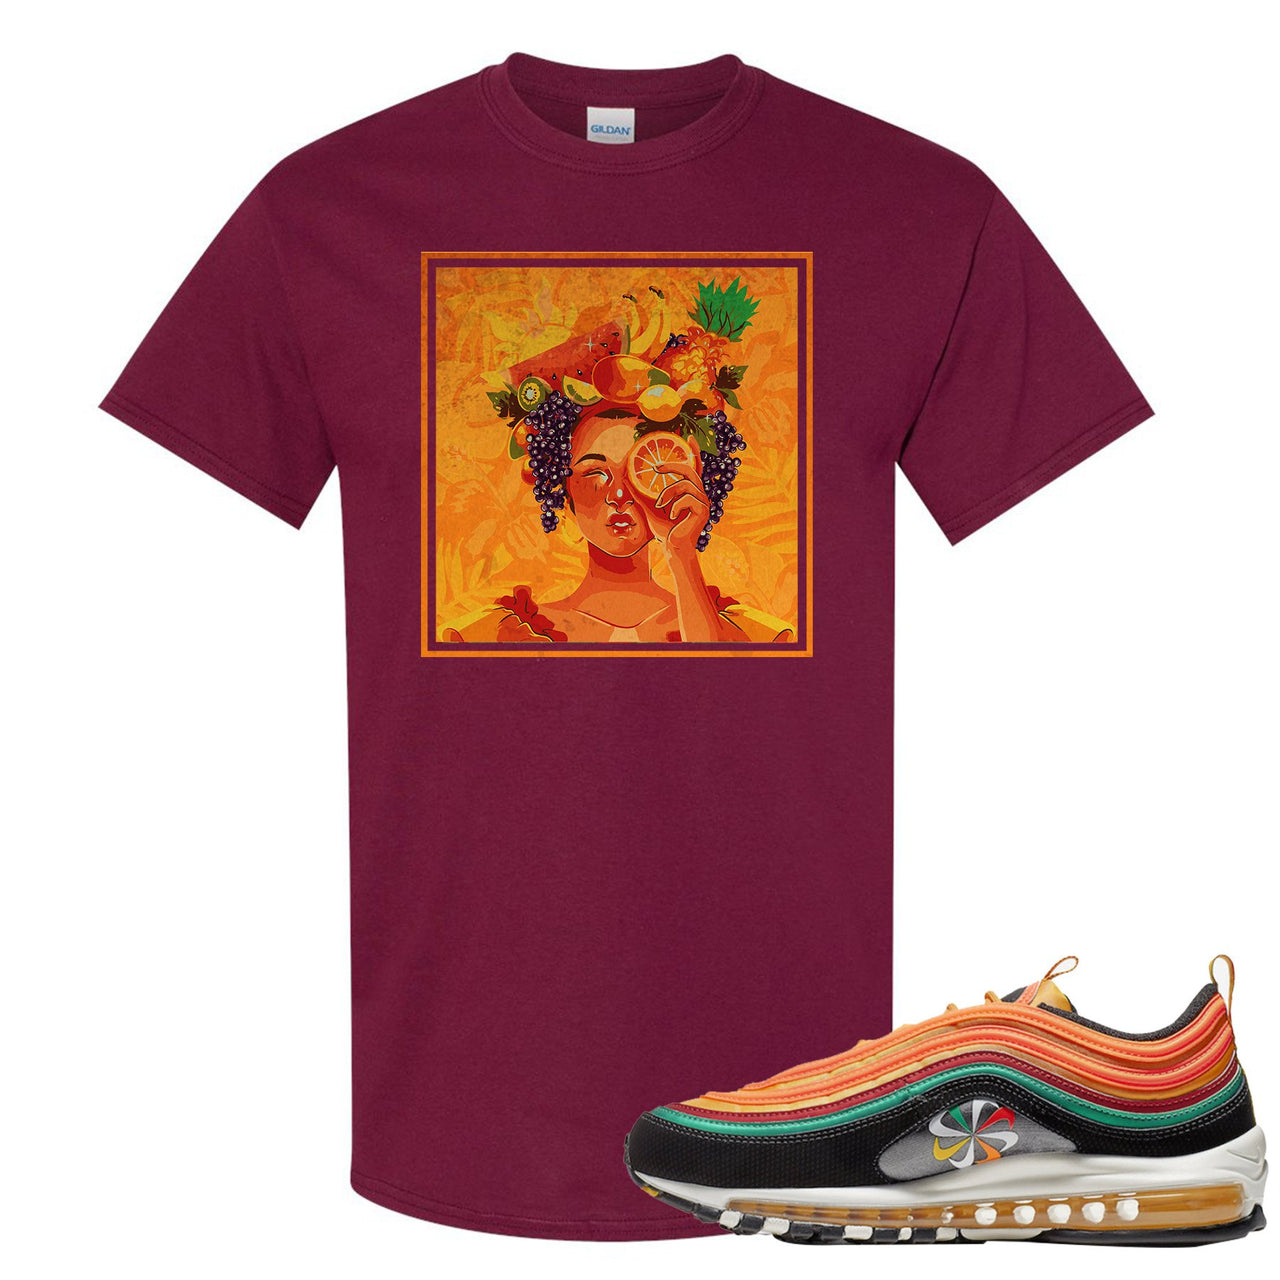 Printed on the front of the Air Max 97 Sunburst maroon sneaker matching t-shirt is the Lady Fruit logo